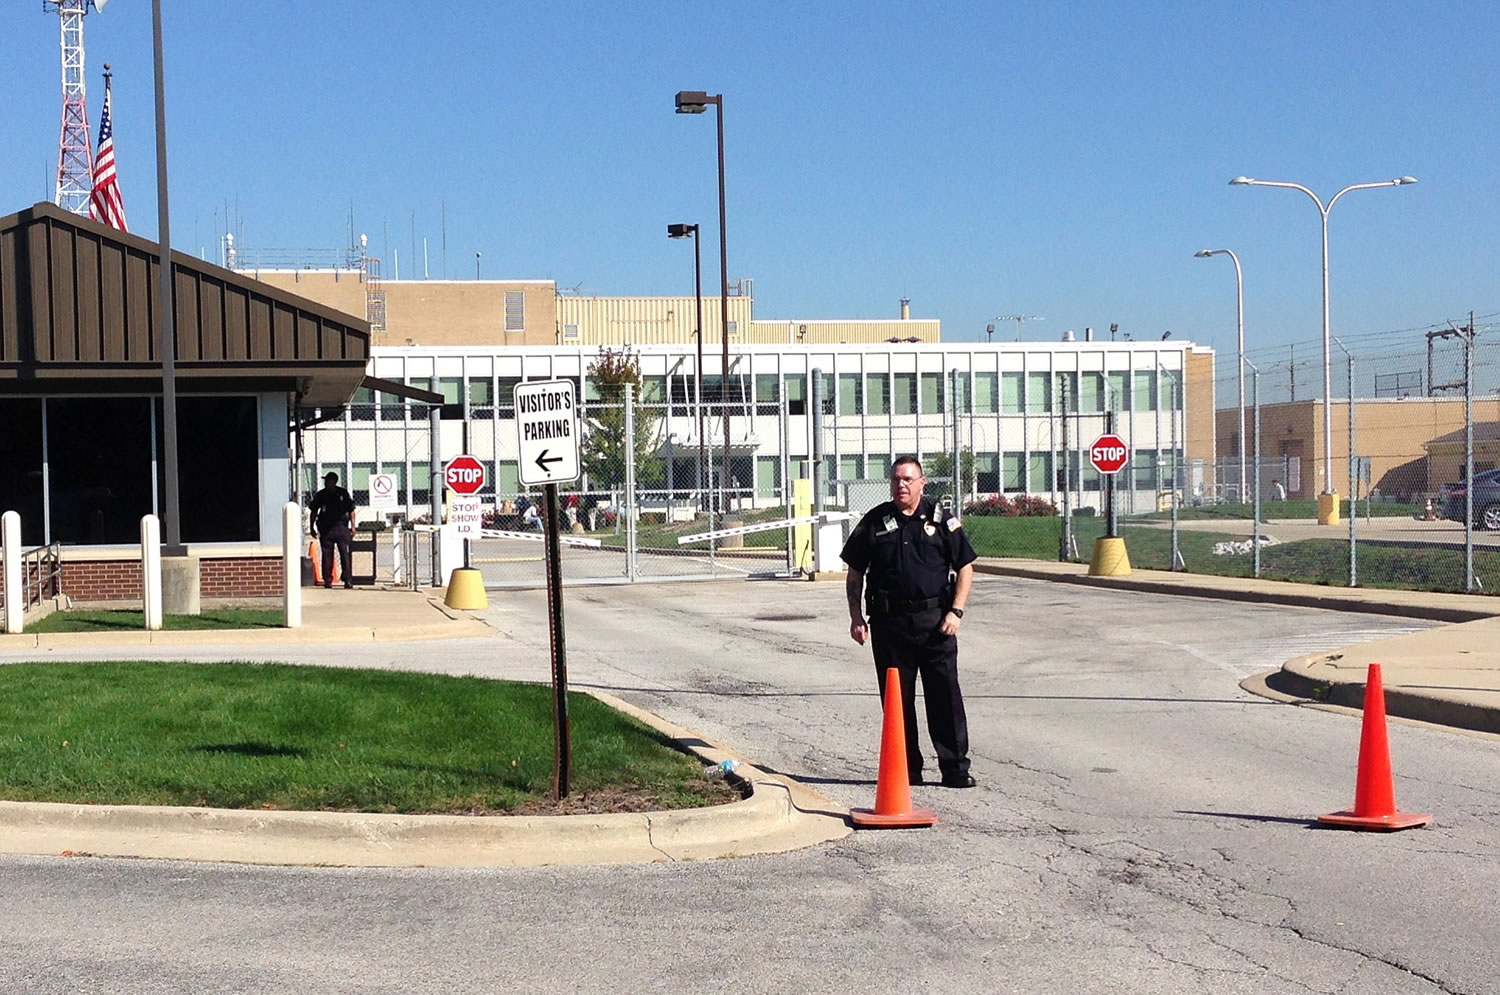 Security stands in front of the air traffic control facility in Aurora, Ill., on Friday. All flights in and out of Chicago's two airports were halted Friday after a fire at the suburban air traffic control facility sent delays and cancellations rippling through the U.S.